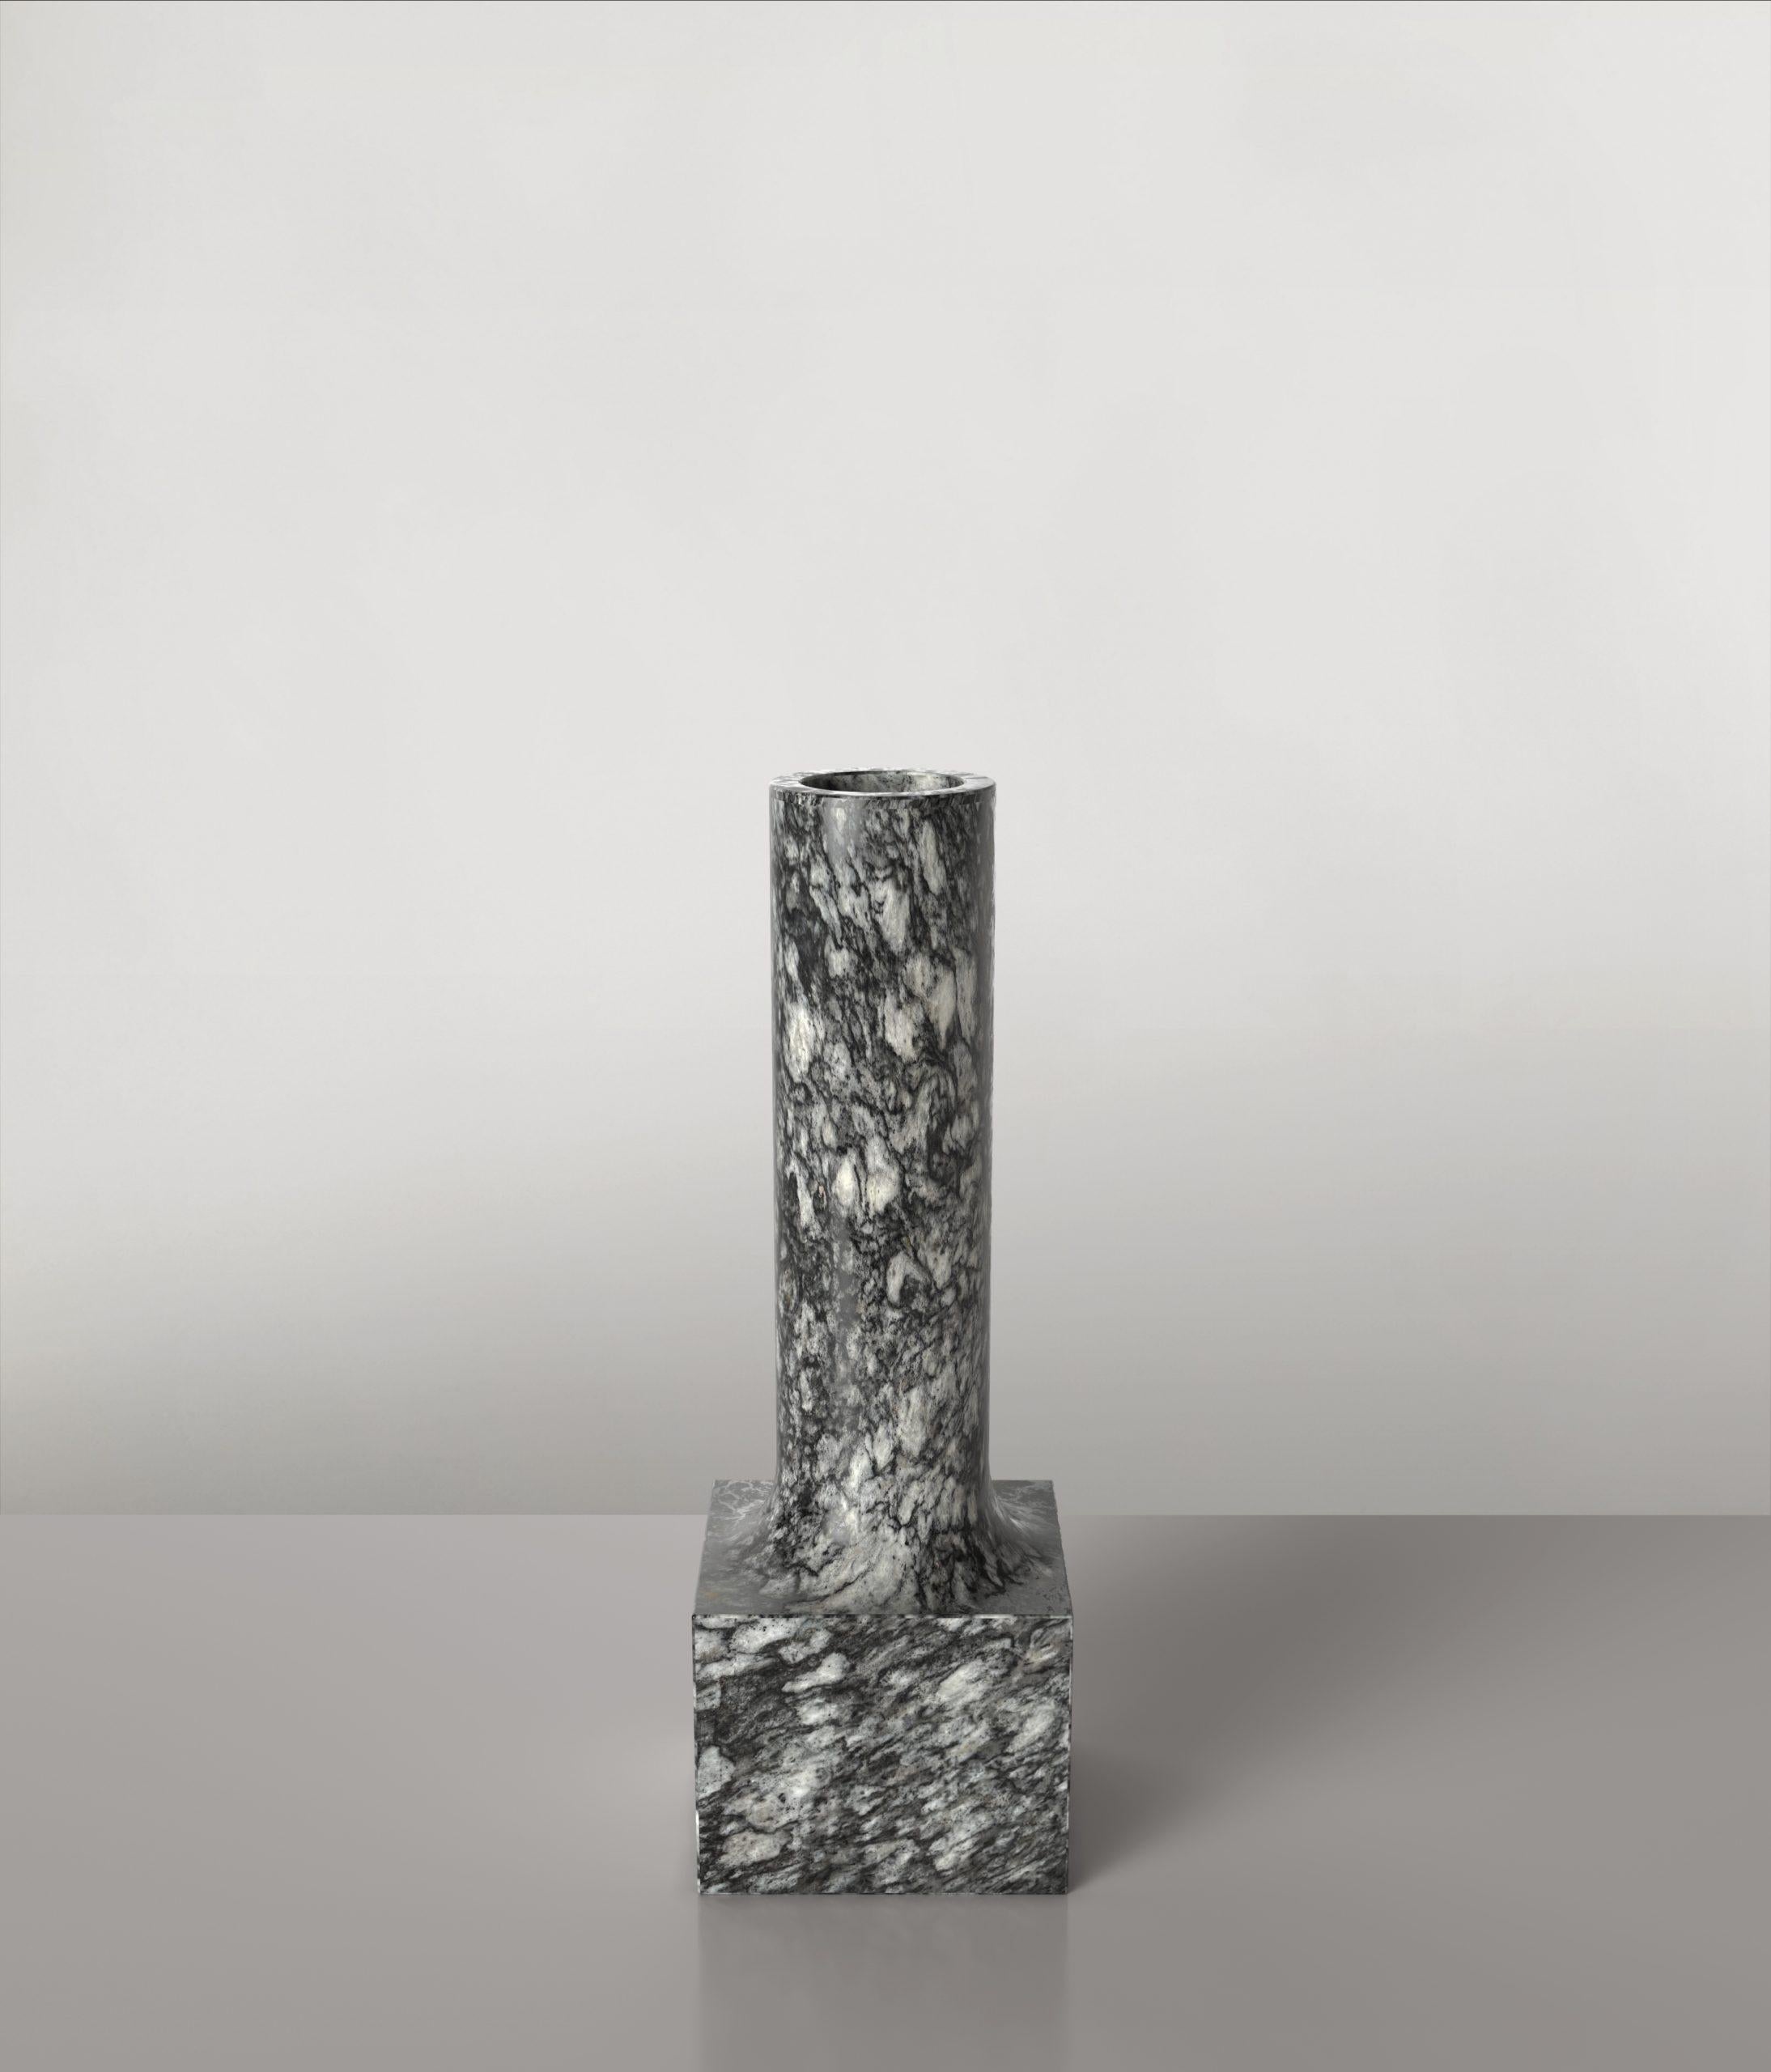 Palazzo V2 vase by Edizione Limitata
Limited Edition of 150 pieces. Signed and numbered.
Dimensions: D 12 x W 12 x H 35 cm.
Materials: Granite.

Edizione Limitata, that is to say “Limited Edition”, is a brand promoting and developing objects